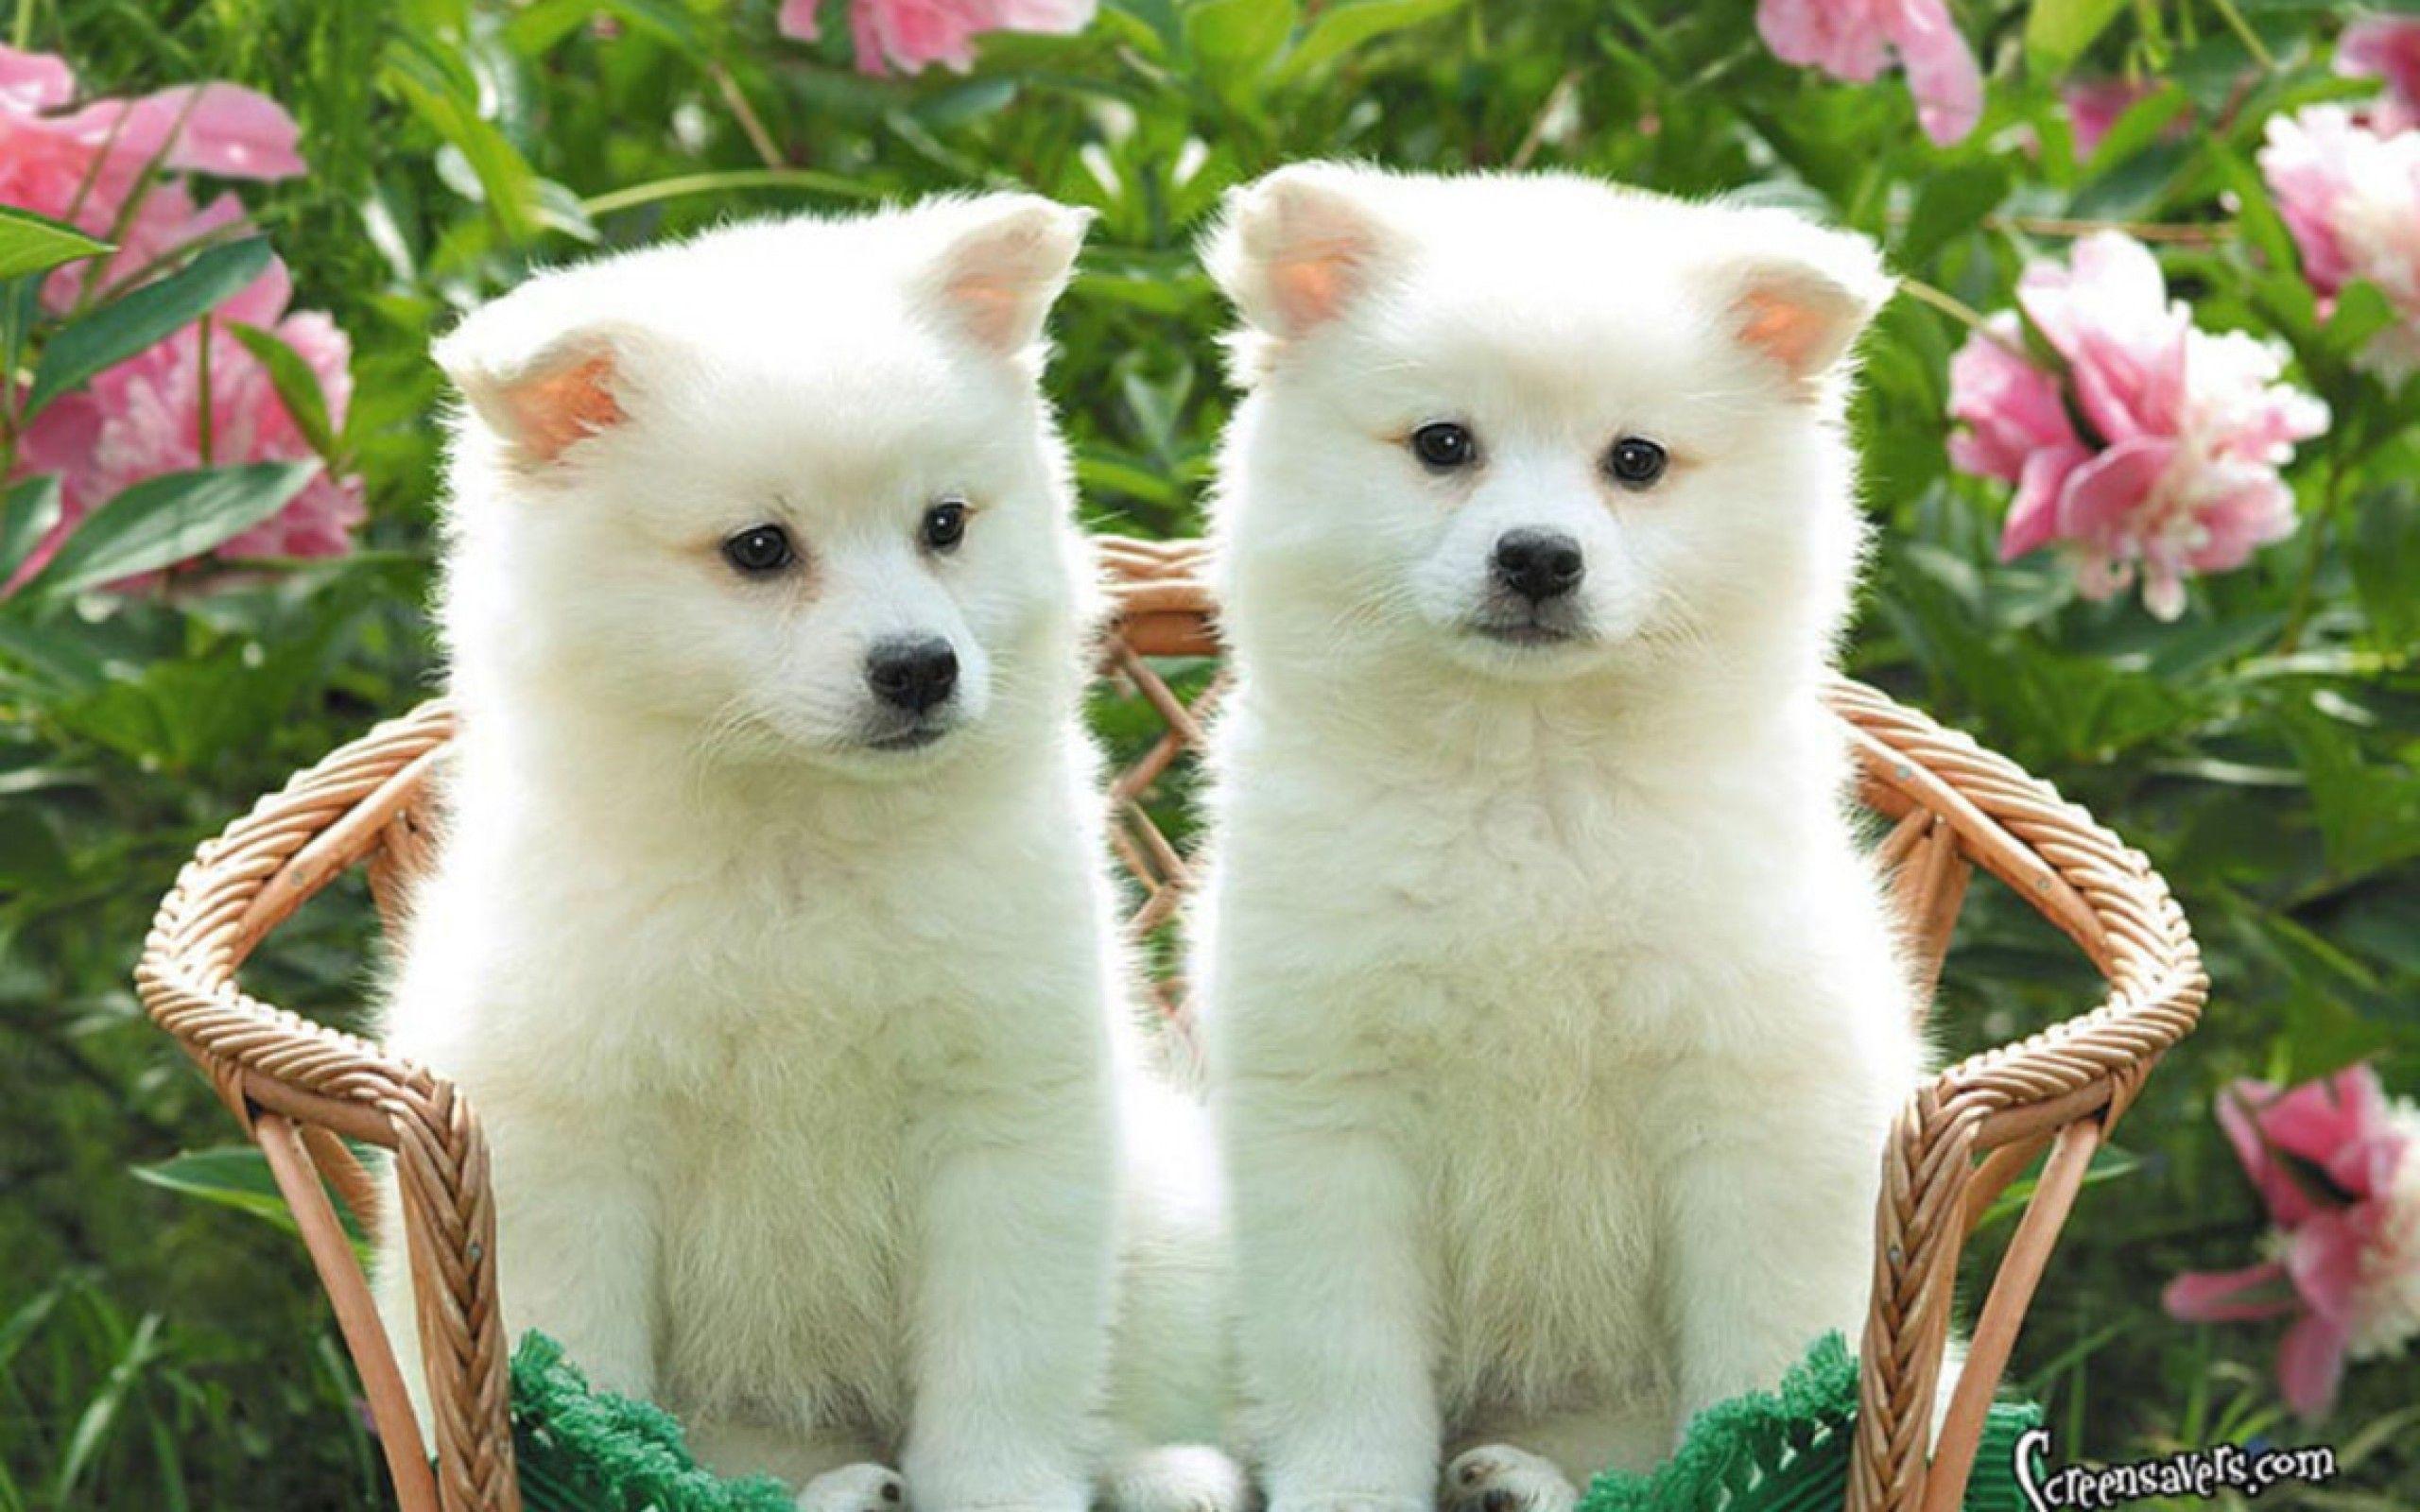 Puppies Together HD Wallpaper For Desktop And Cute Kittens